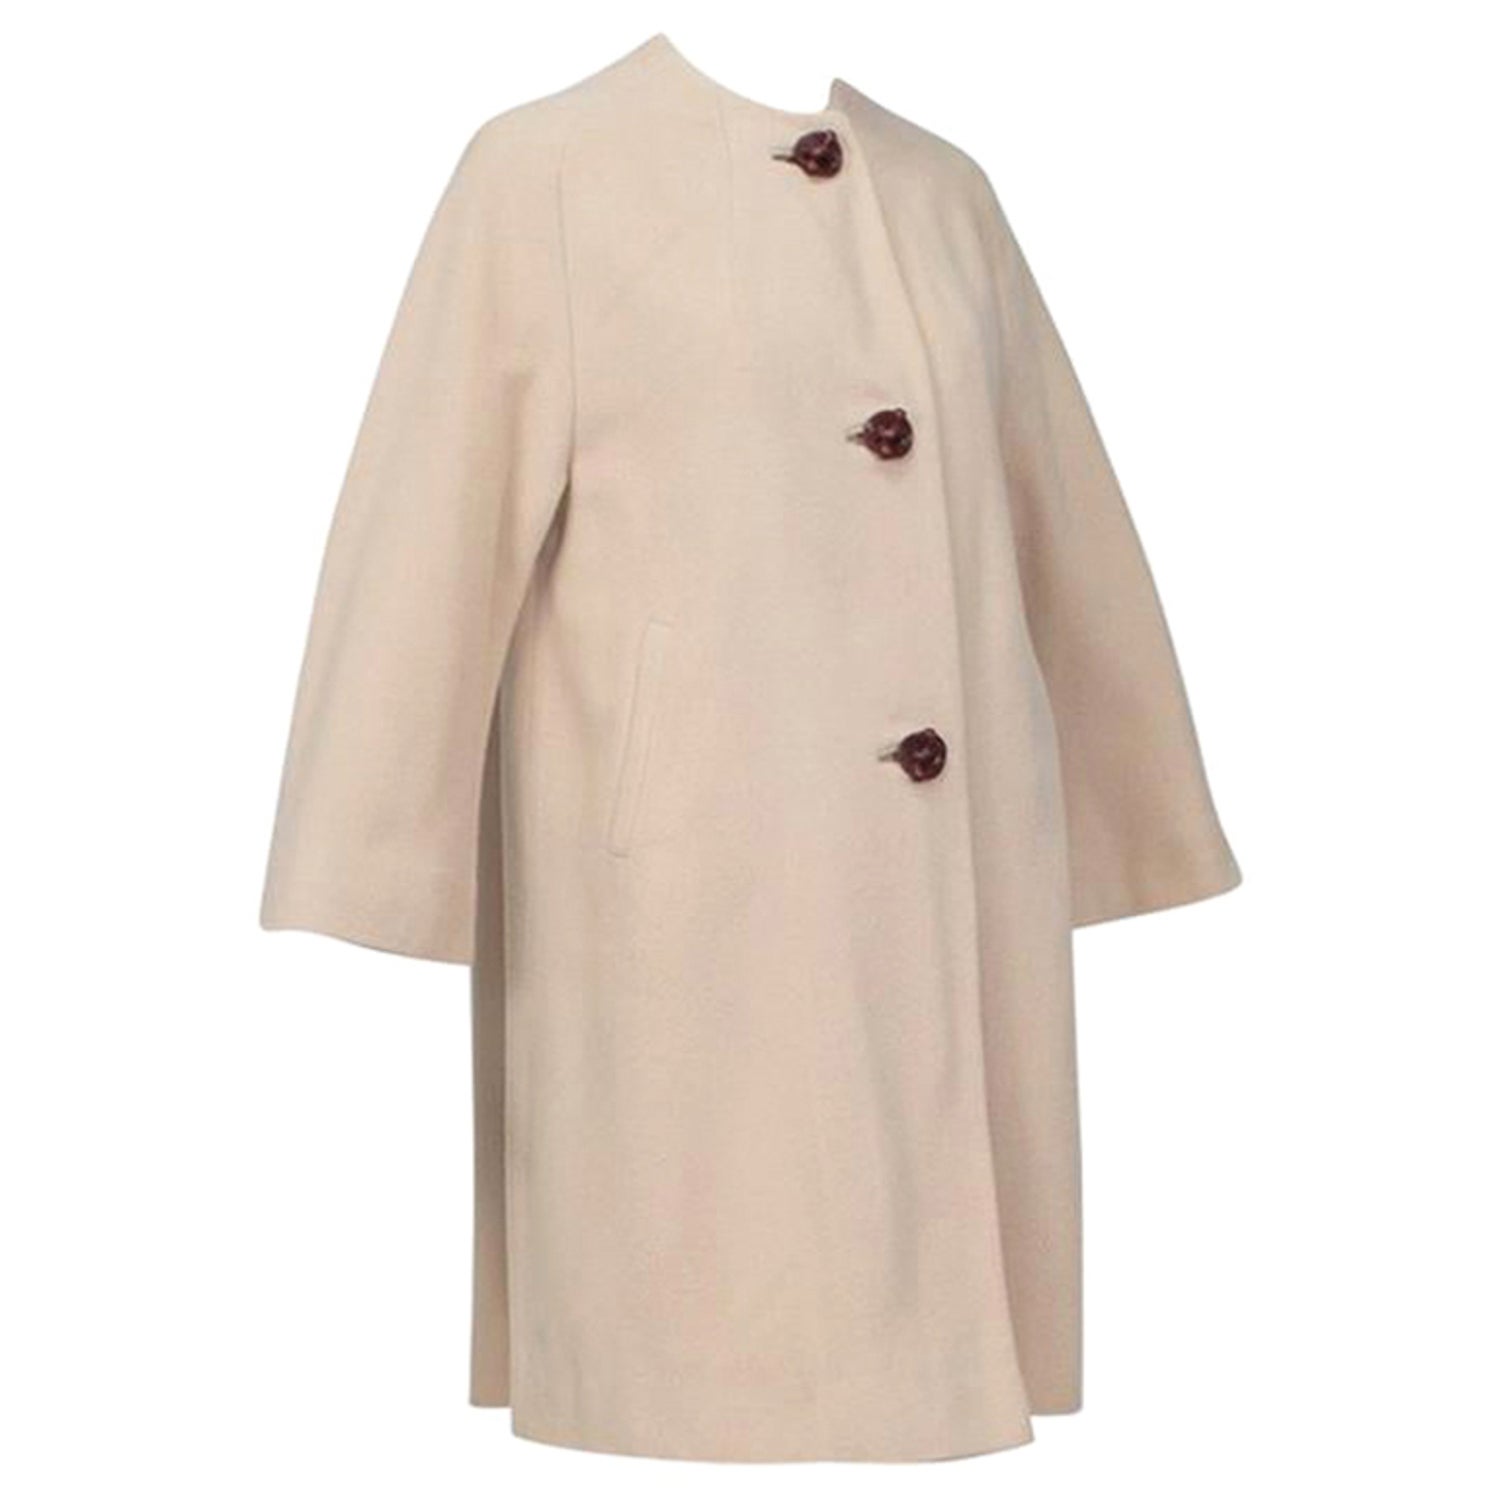 LOUIS VUITTON Cotton Trench Coat 38 Brown Authentic Women Used from Japan